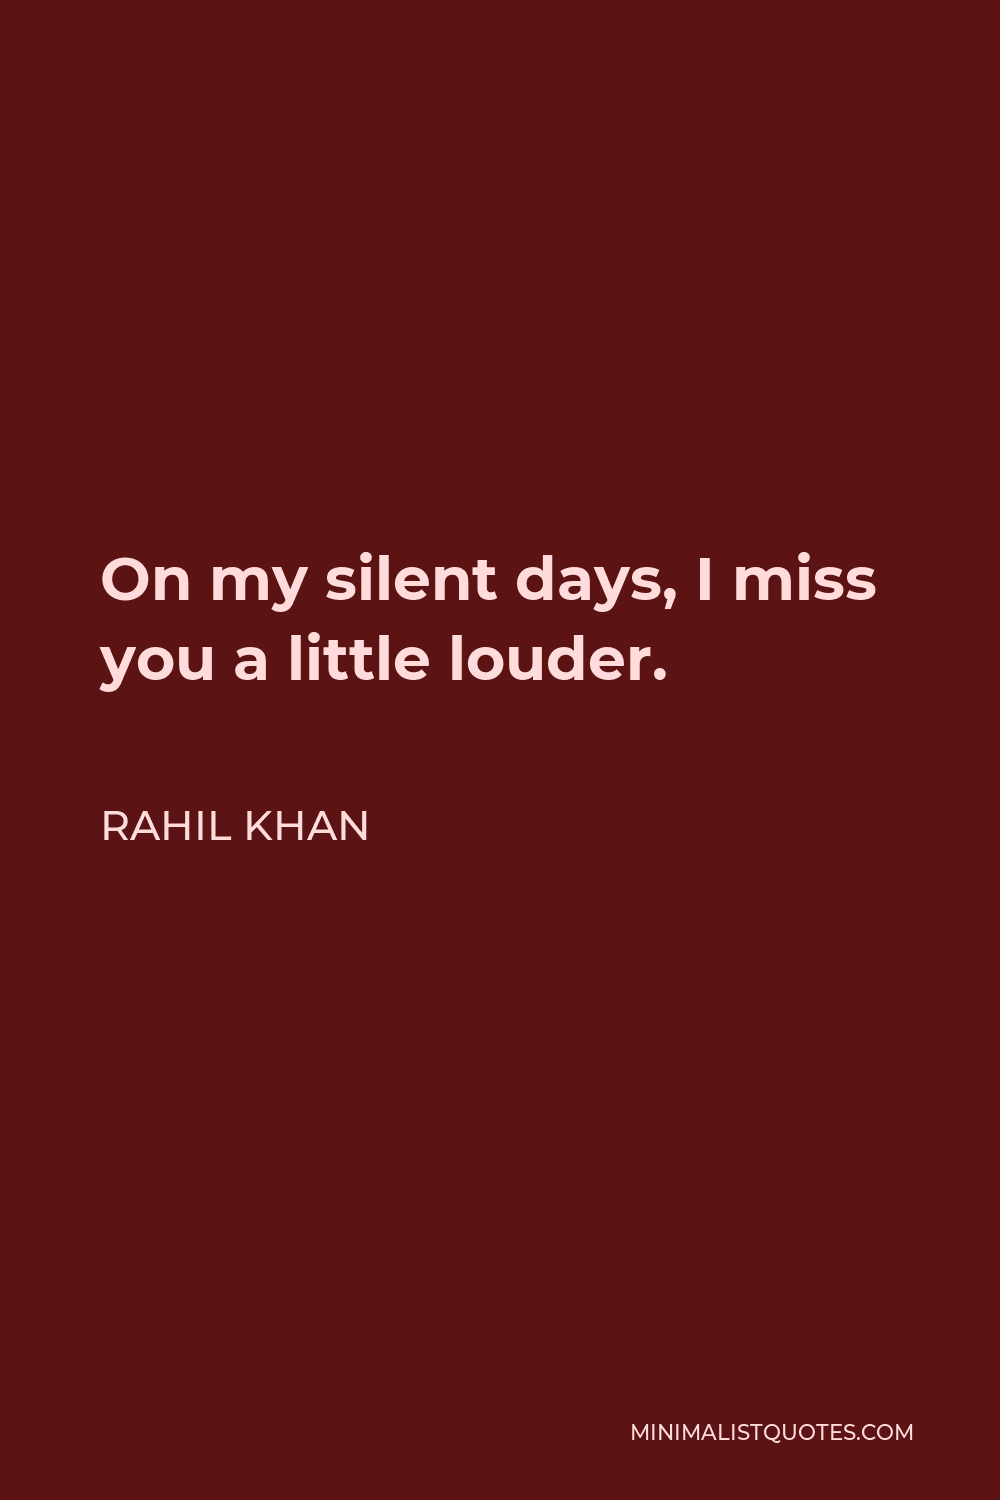 Rahil Khan Quote - On my silent days, I miss you a little louder.